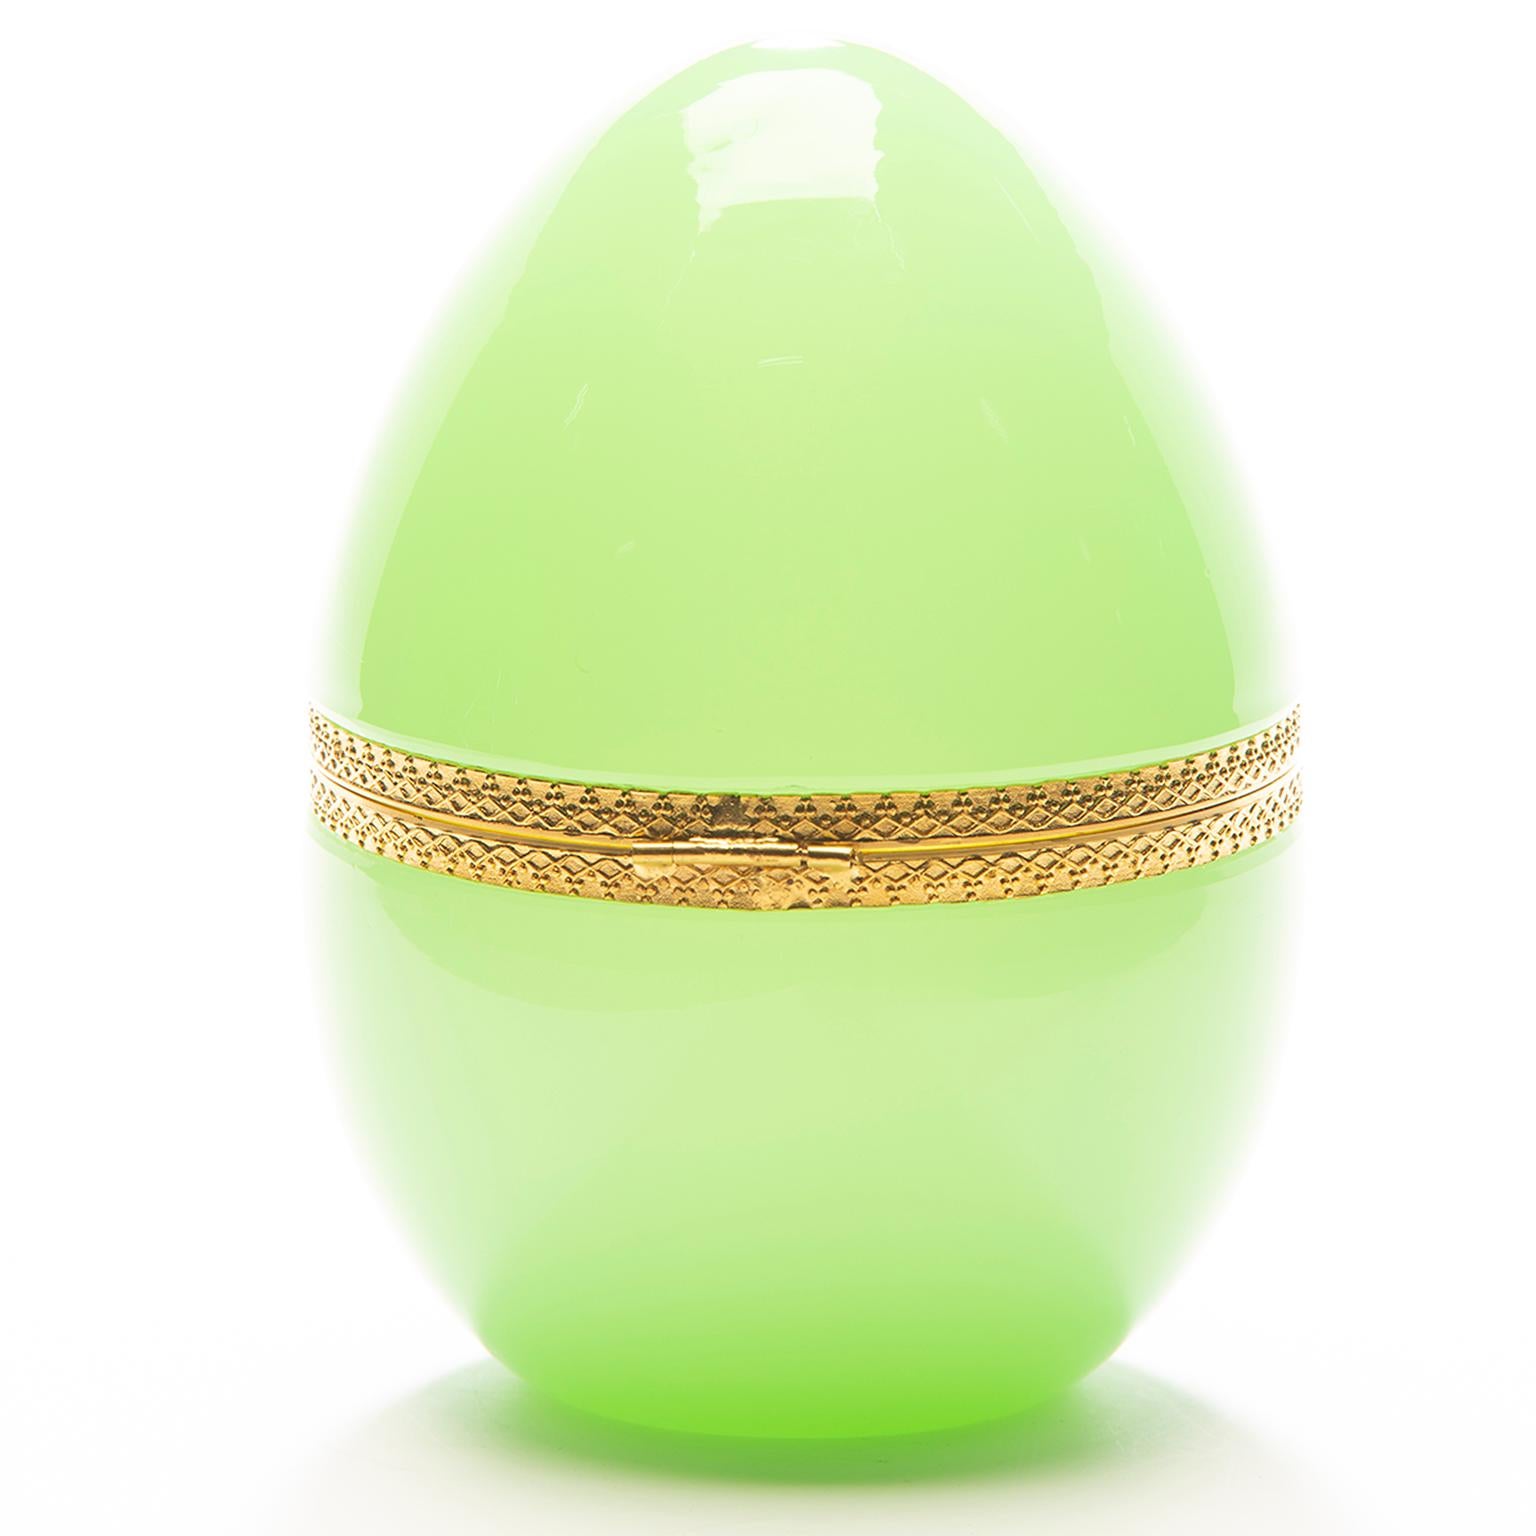 Pale green French opaline glass keepsake box is egg-shaped with a hinged lid and brass trim. Excellent vintage condition, circa 1930s.